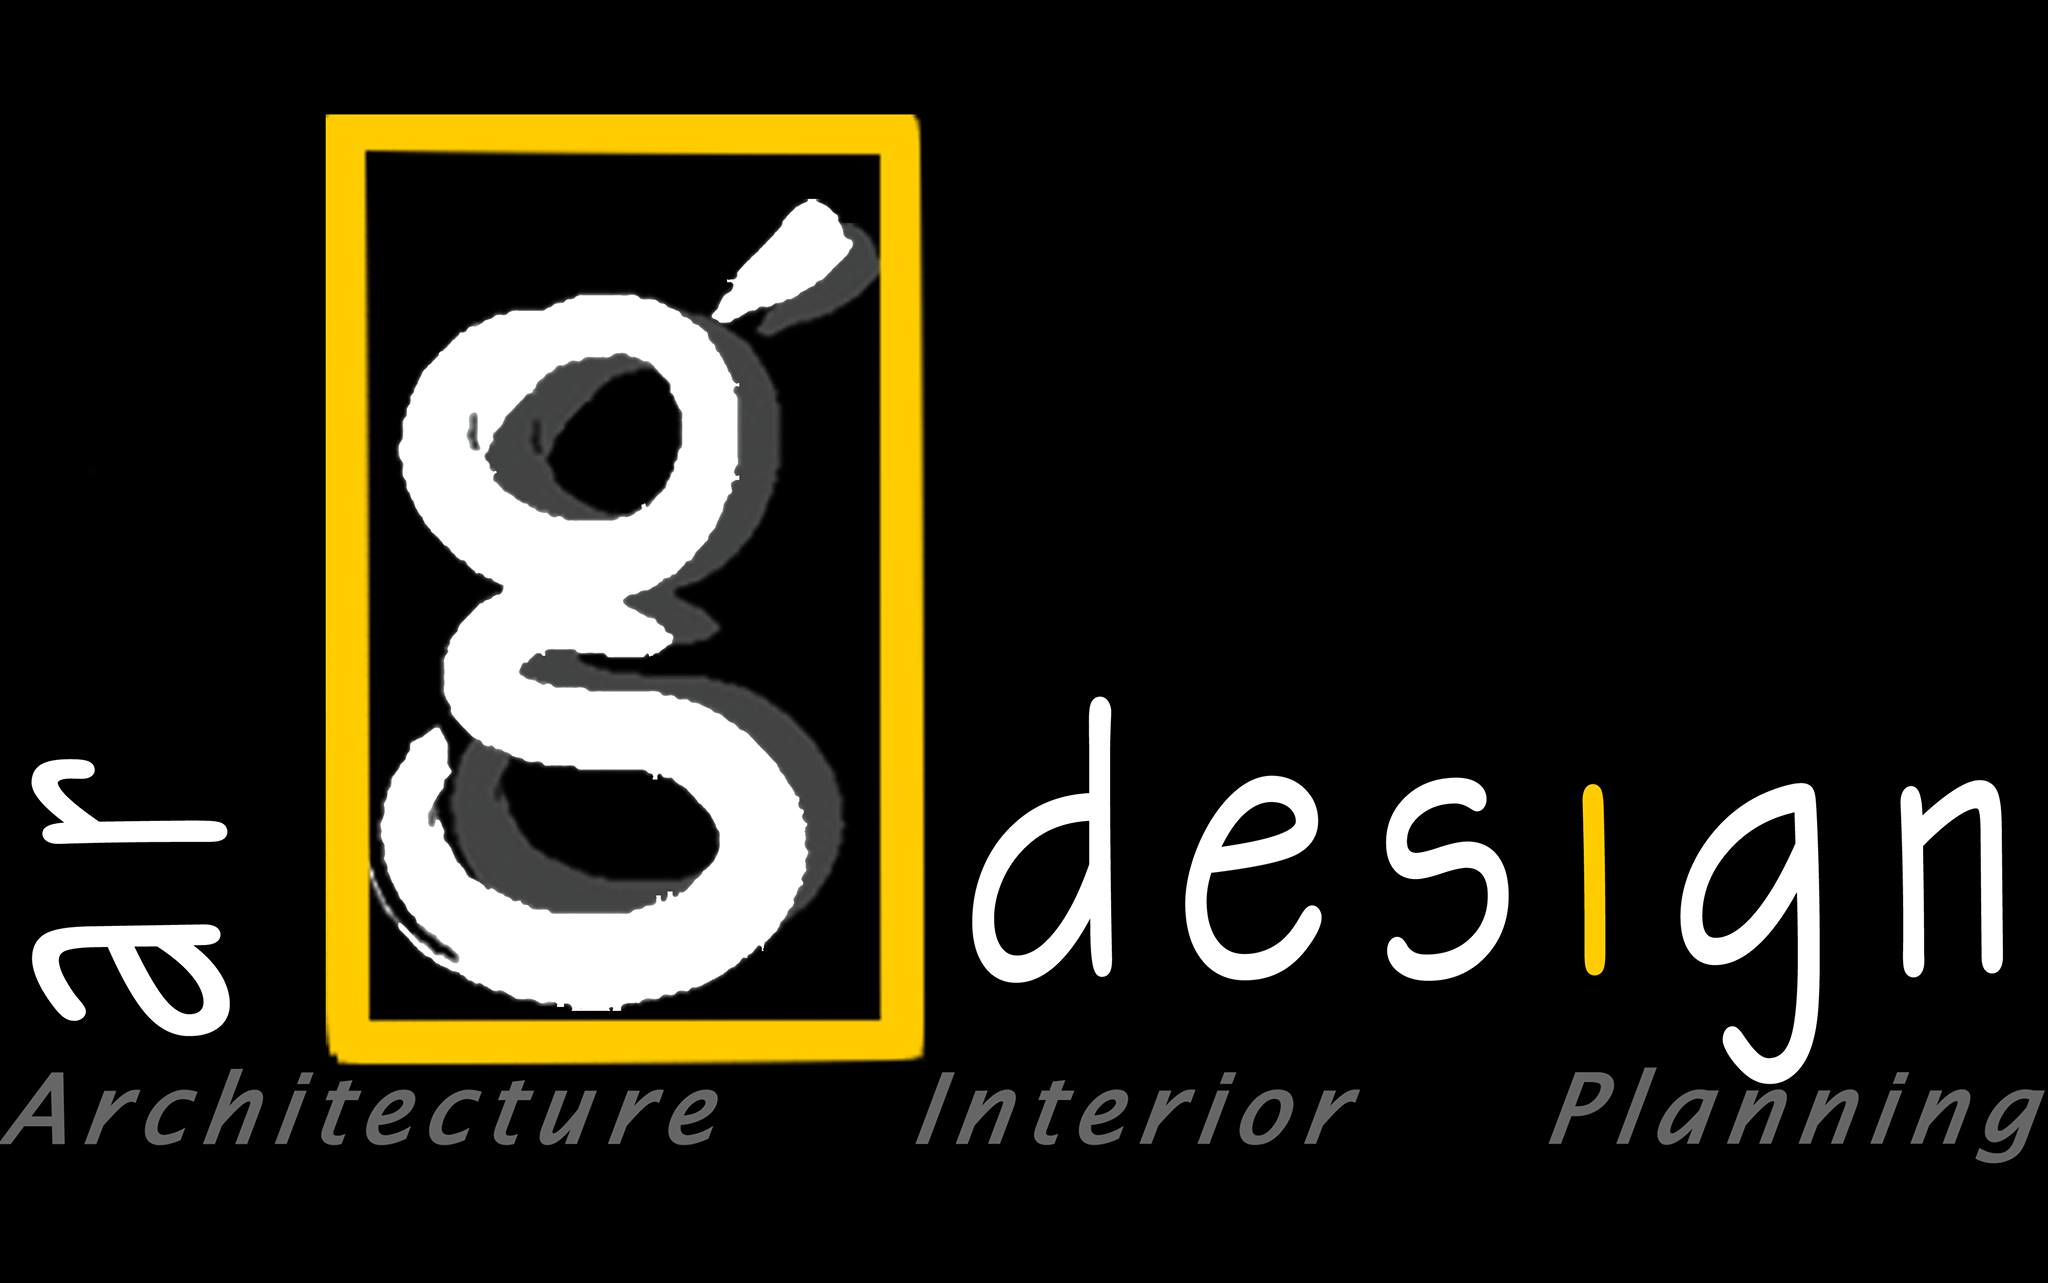 AR G DESIGN|Accounting Services|Professional Services